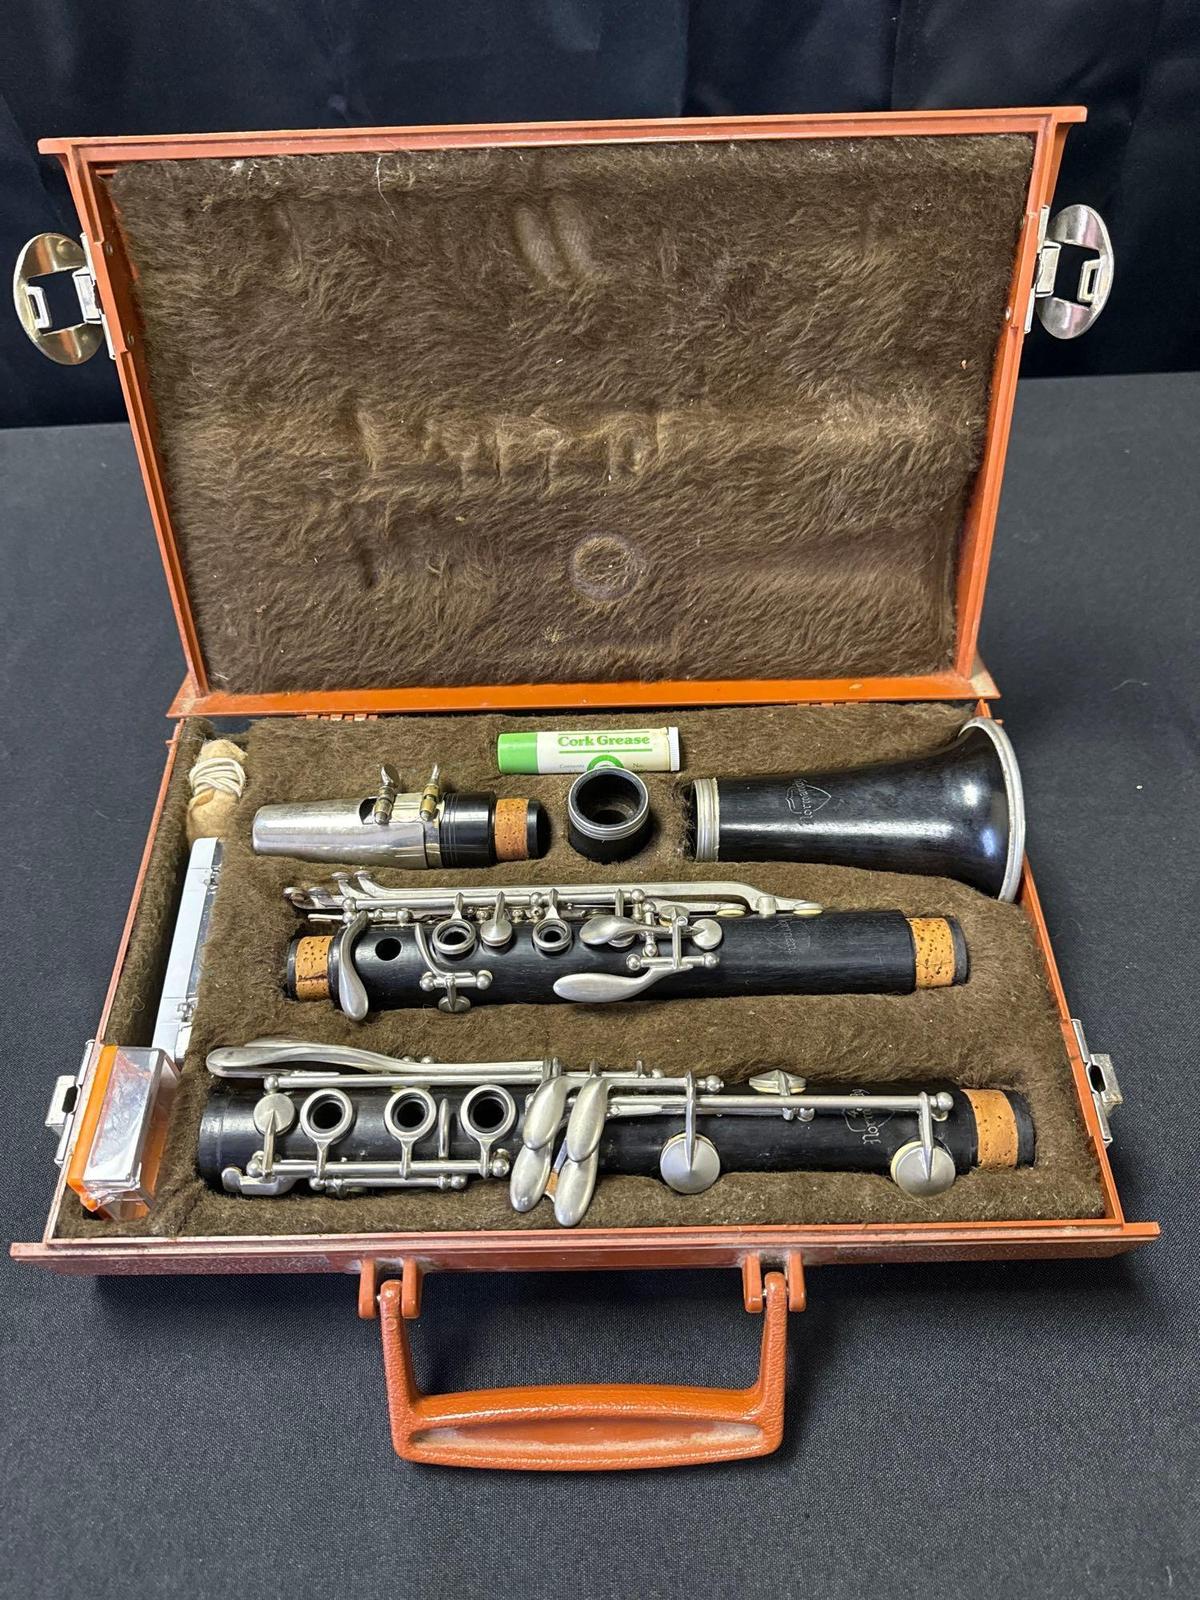 Normandy Clarinet with case made in France